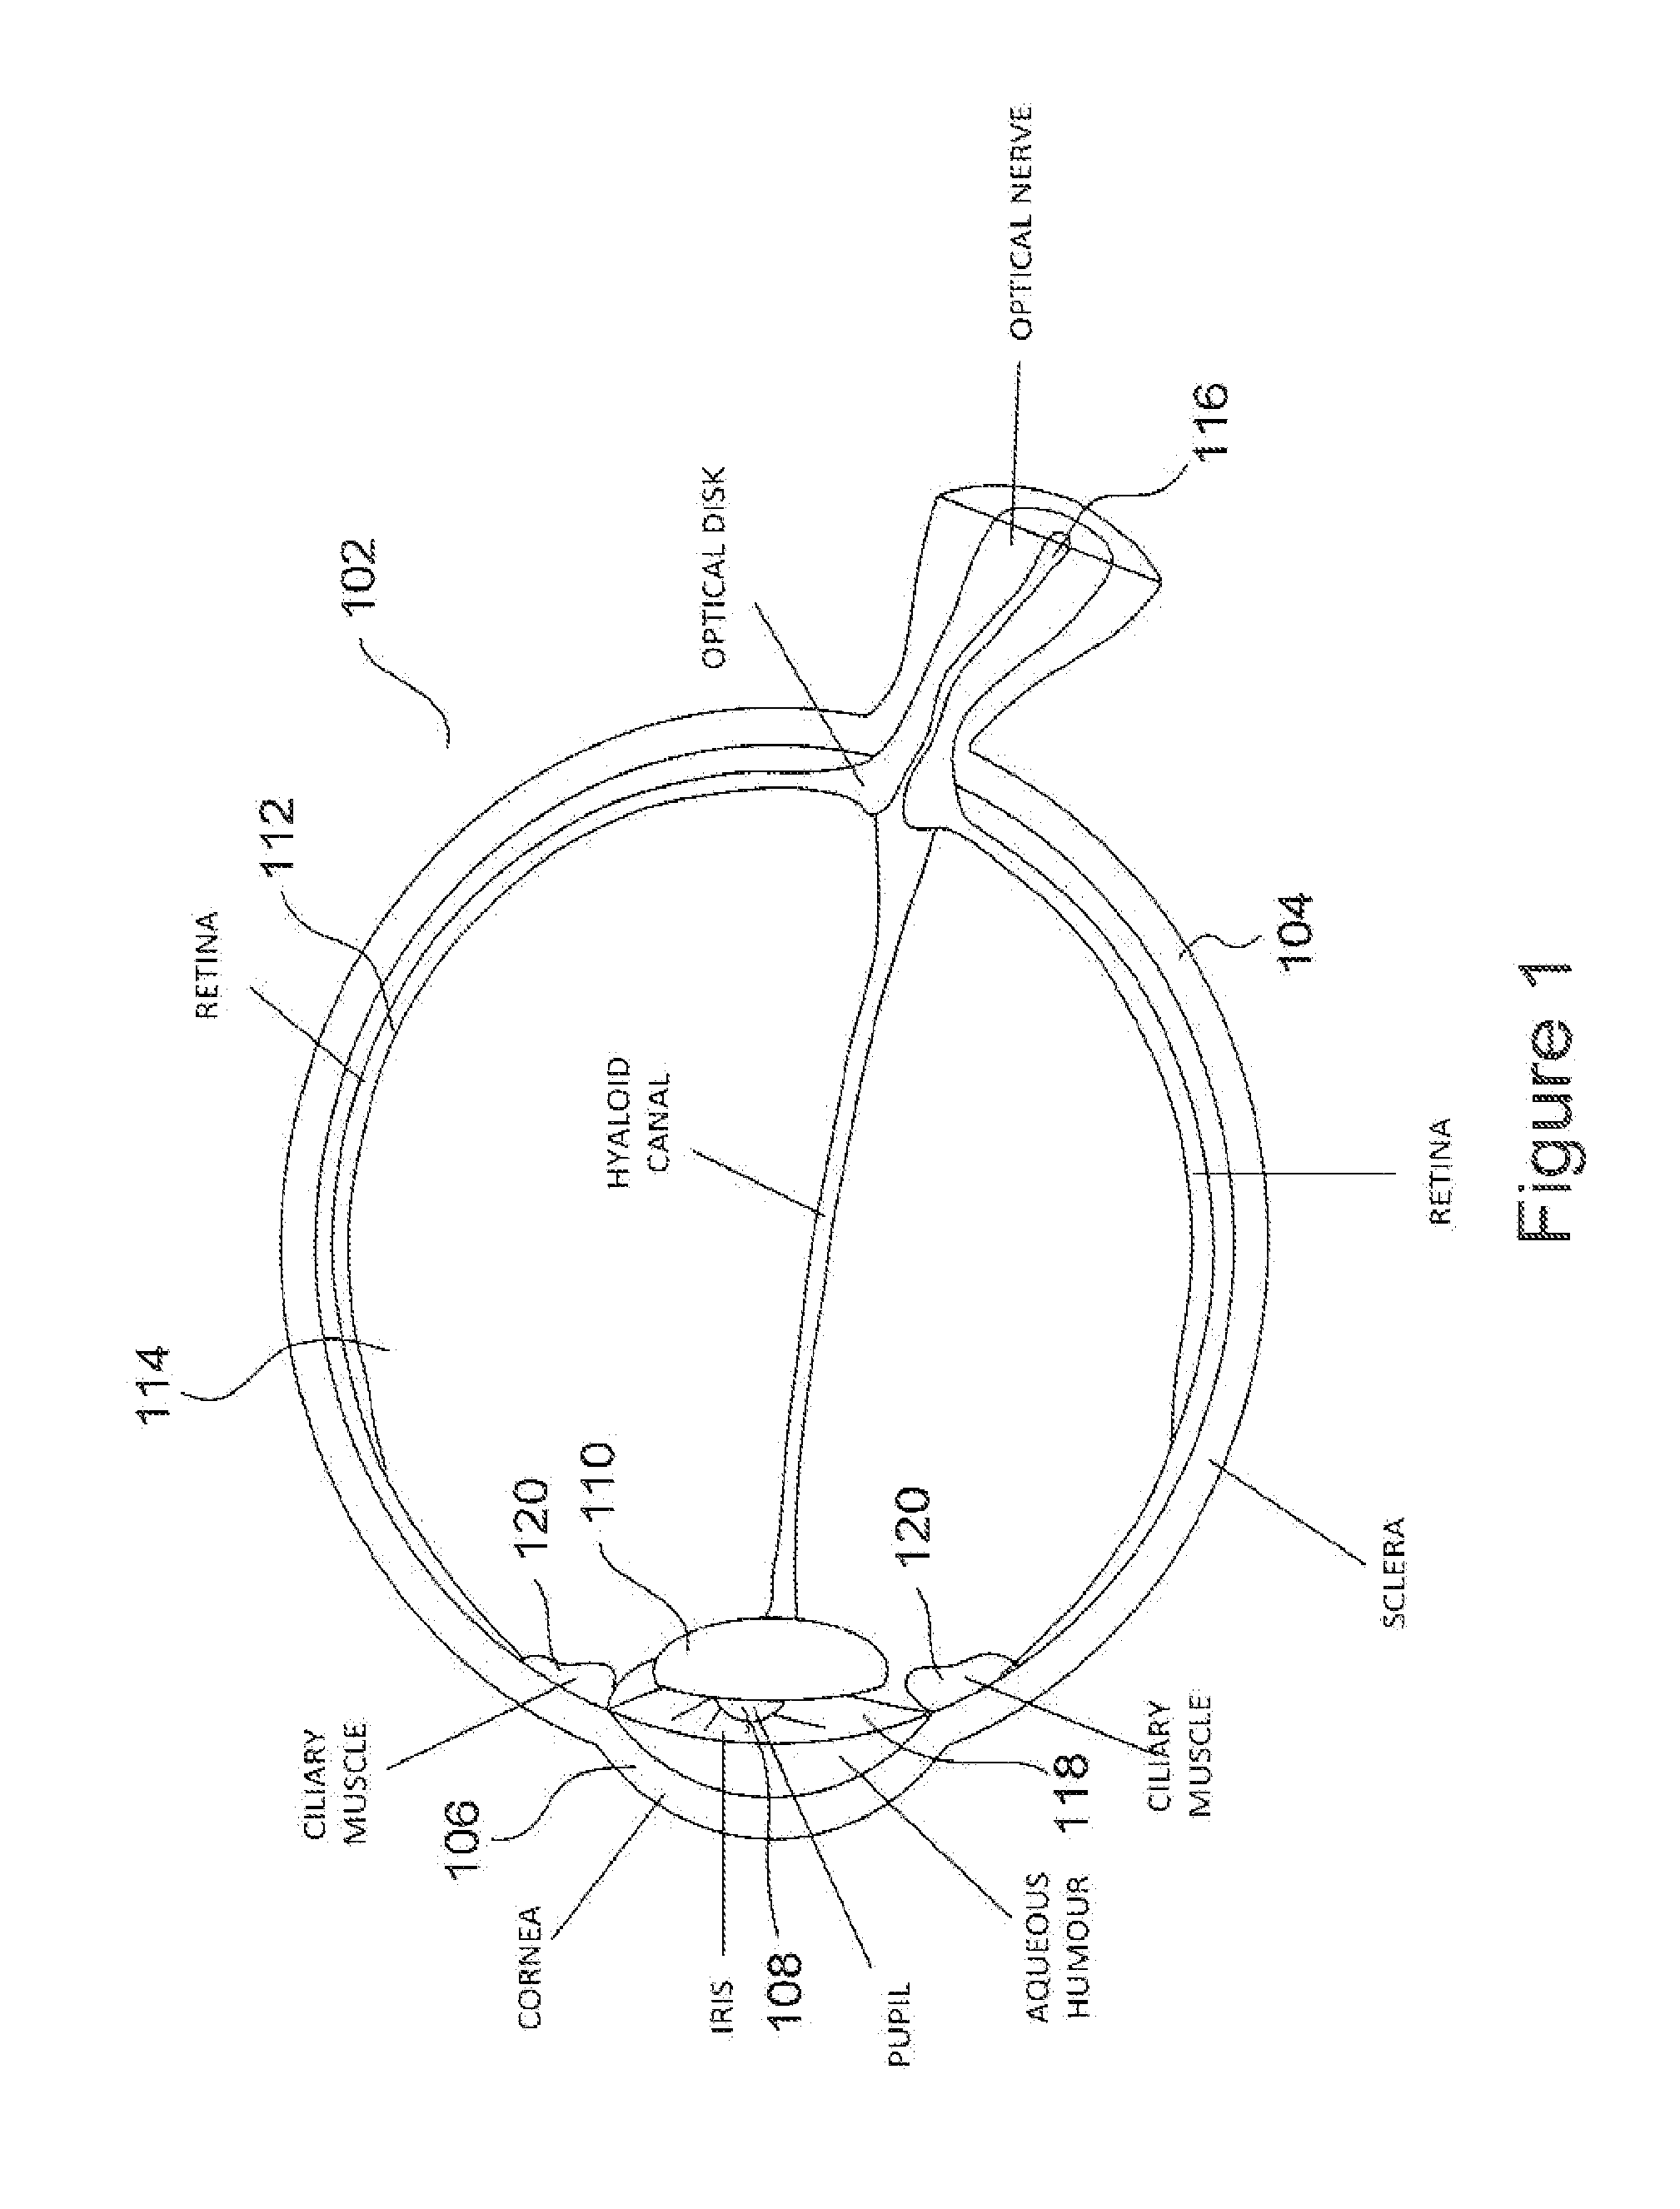 Method and apparatus for limiting growth of eye length